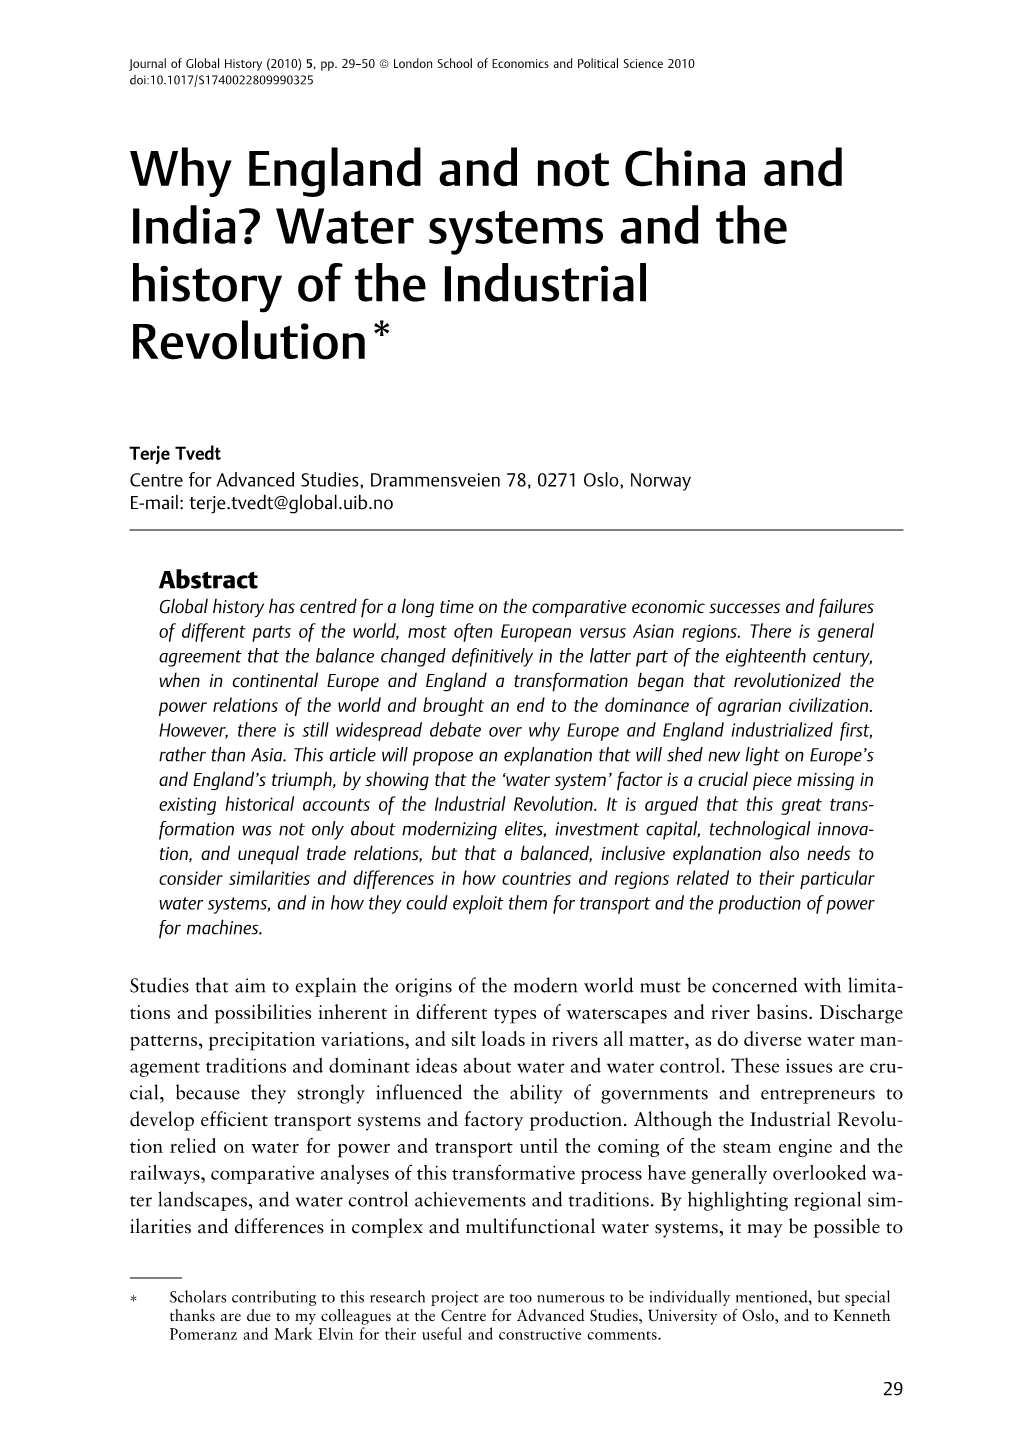 Why England and Not China and India? Water Systems and the History of the Industrial Revolution*